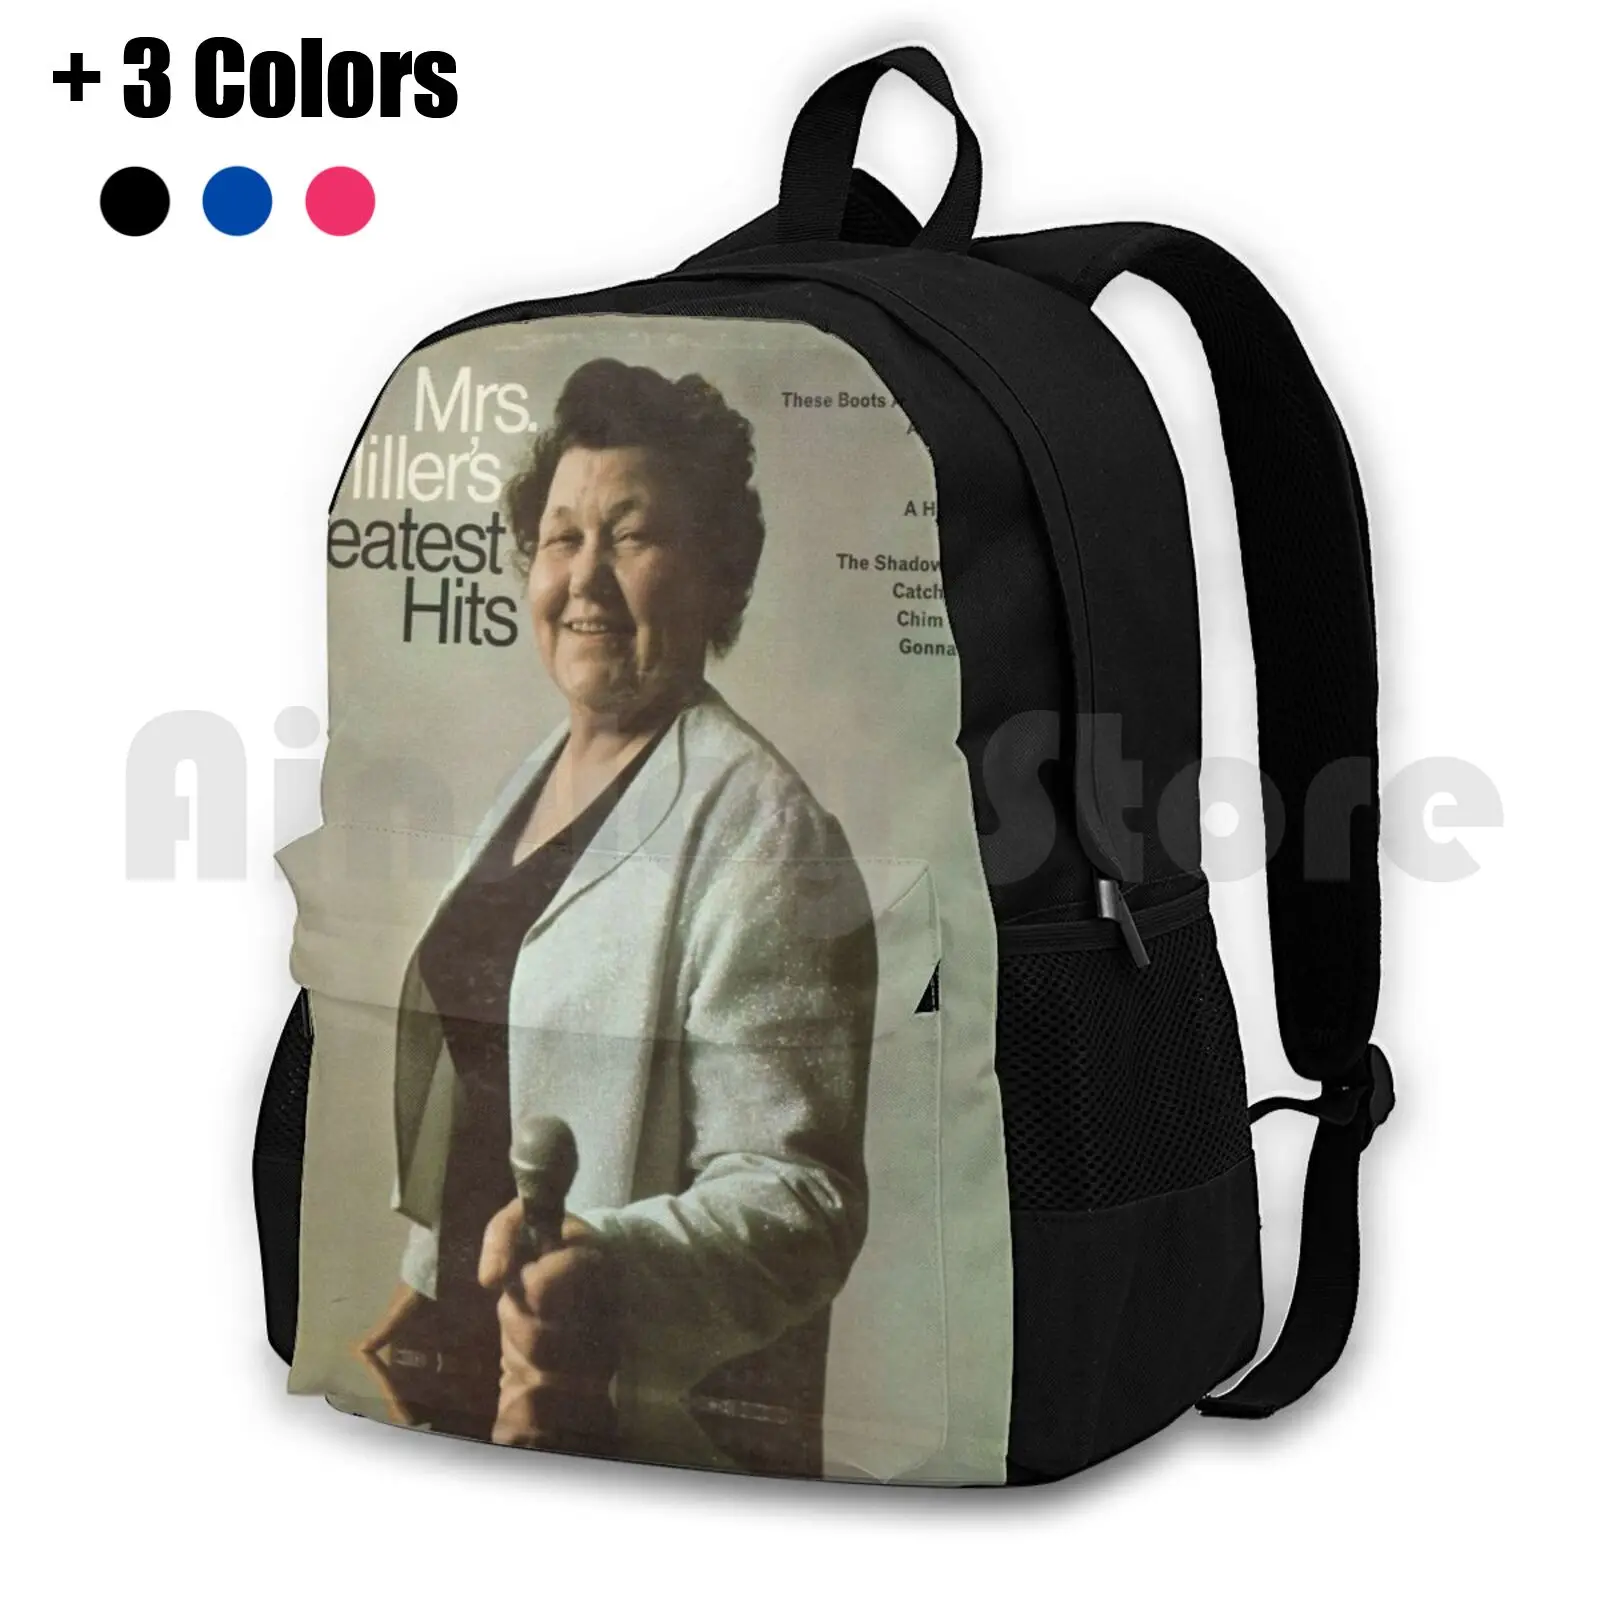 

Mrs. Elva Miller Outdoor Hiking Backpack Waterproof Camping Travel Mrs Miller 60S 1960S Musician Music The Cover Record